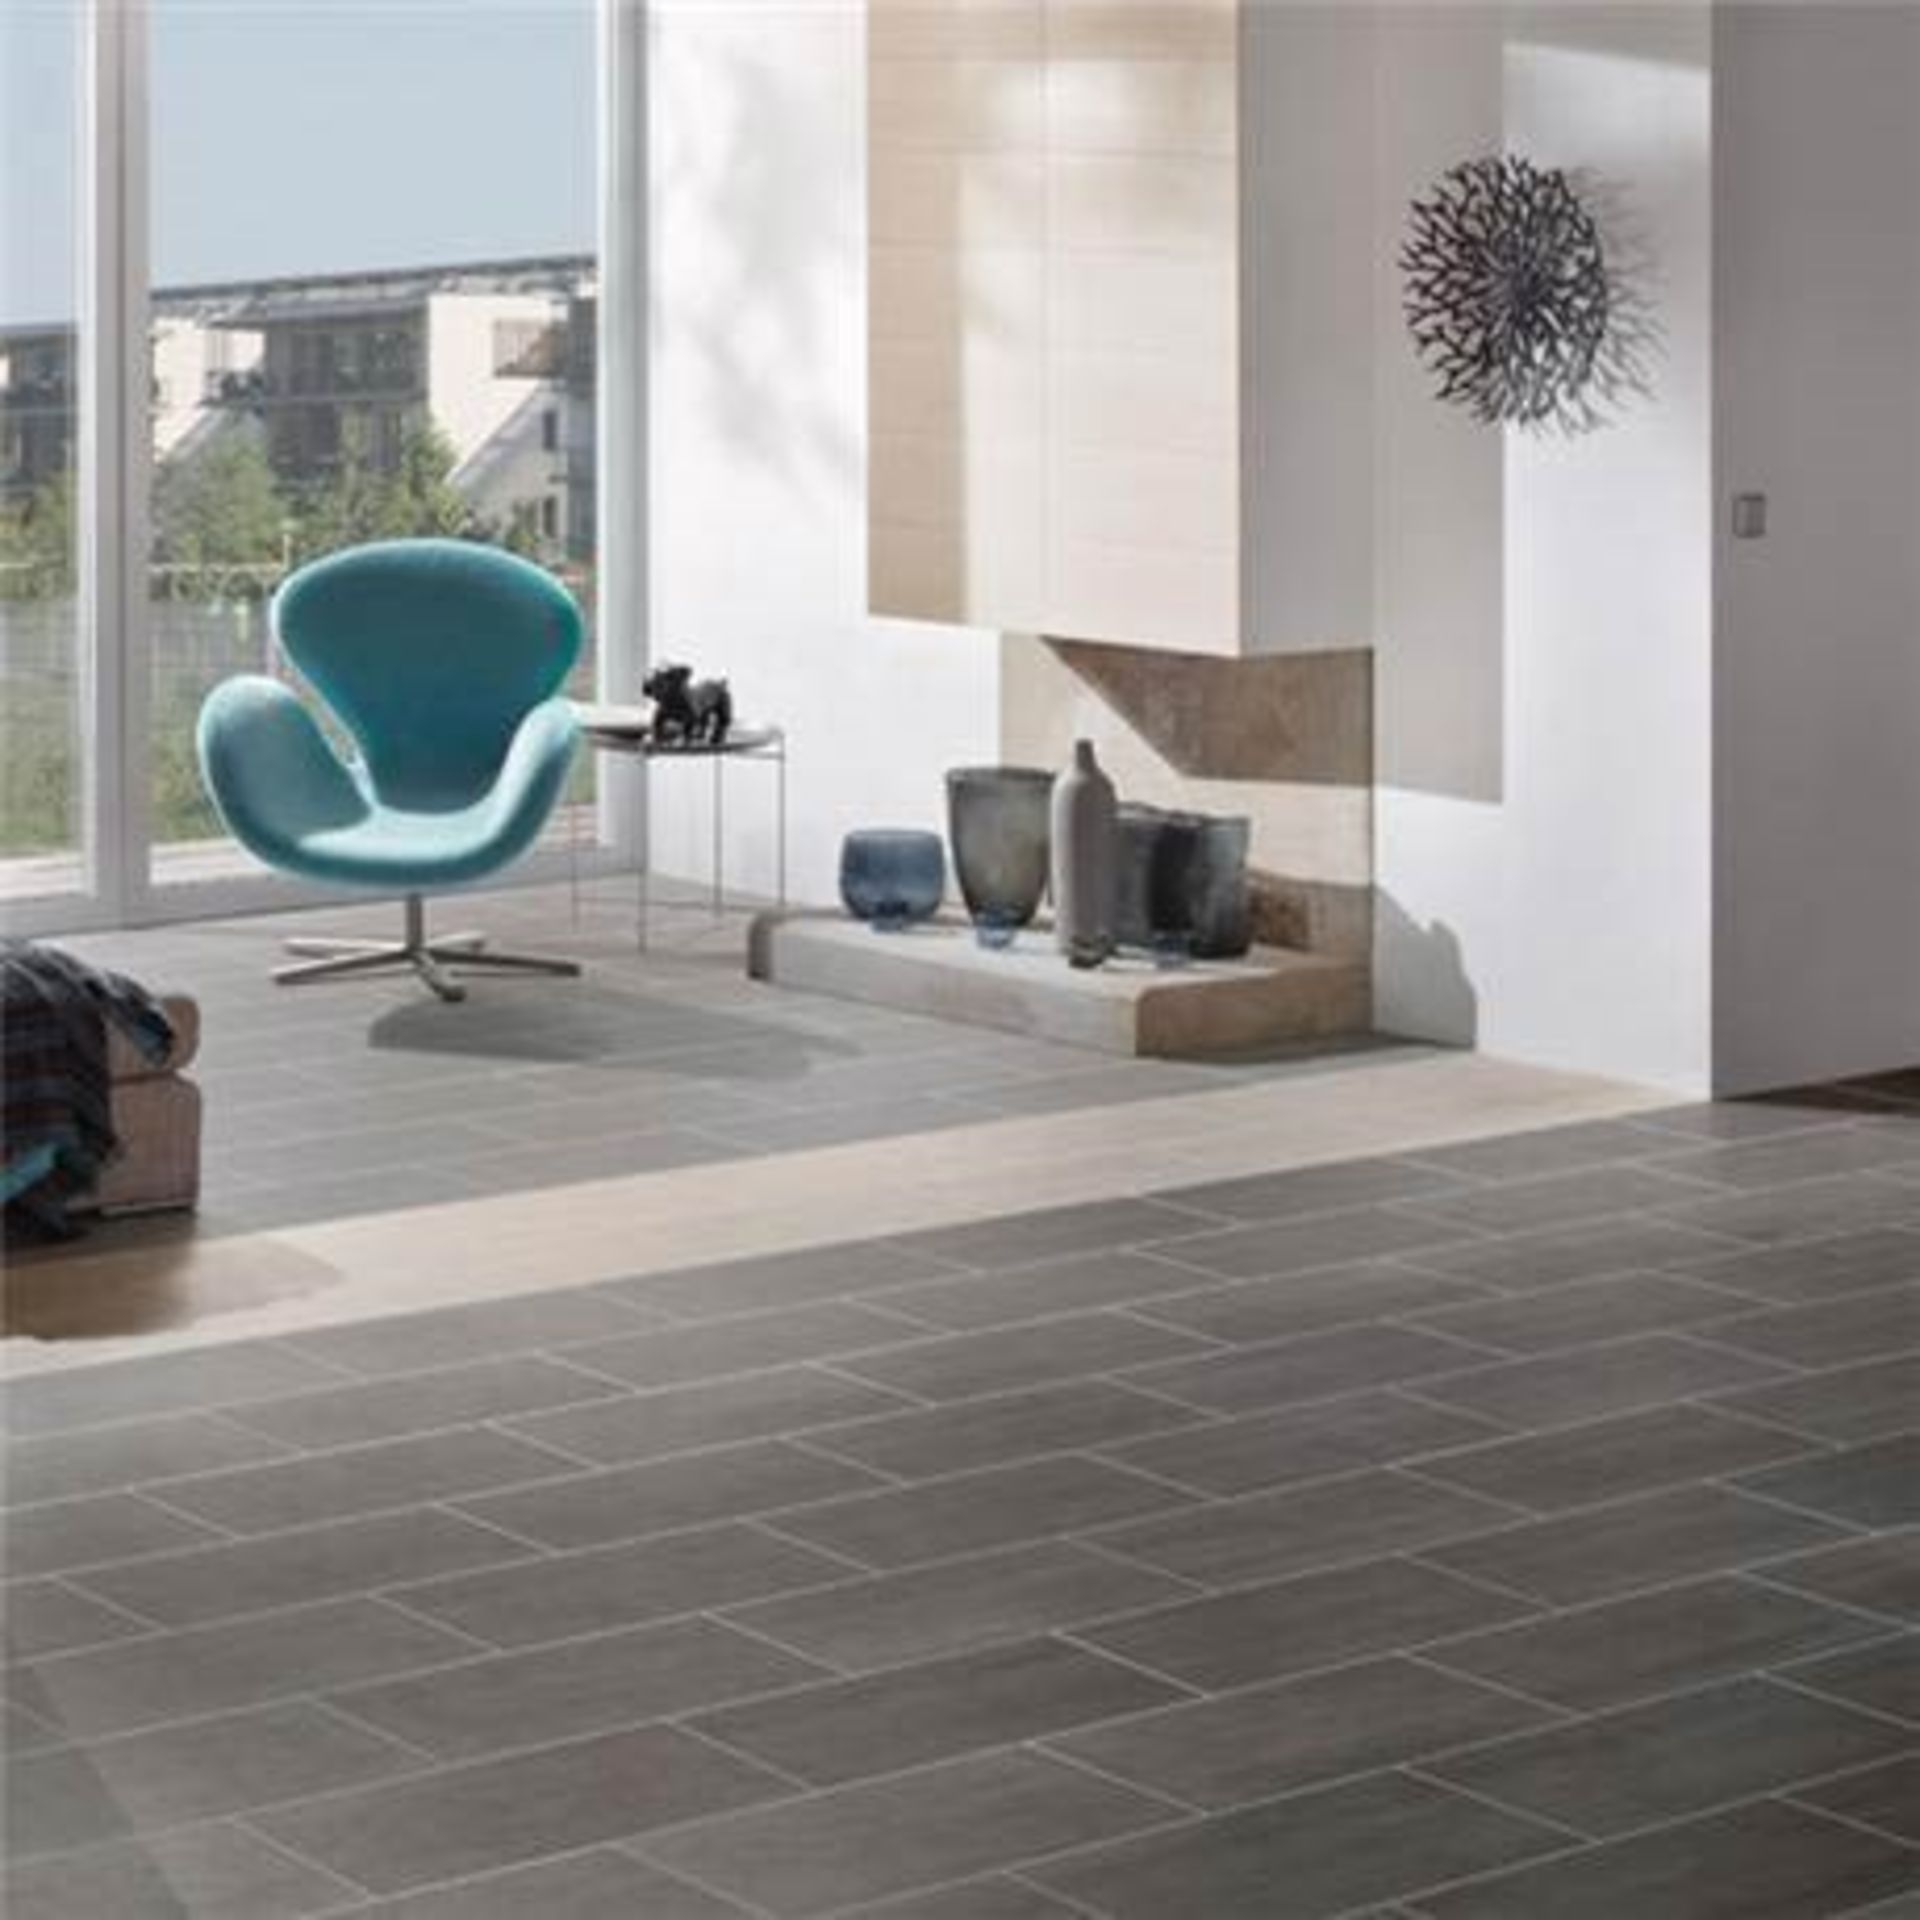 12 x Boxes of RAK Porcelain Floor or Wall Tiles - Dolomit Black - 20 x 50 cm Tiles Covering a - Image 9 of 9